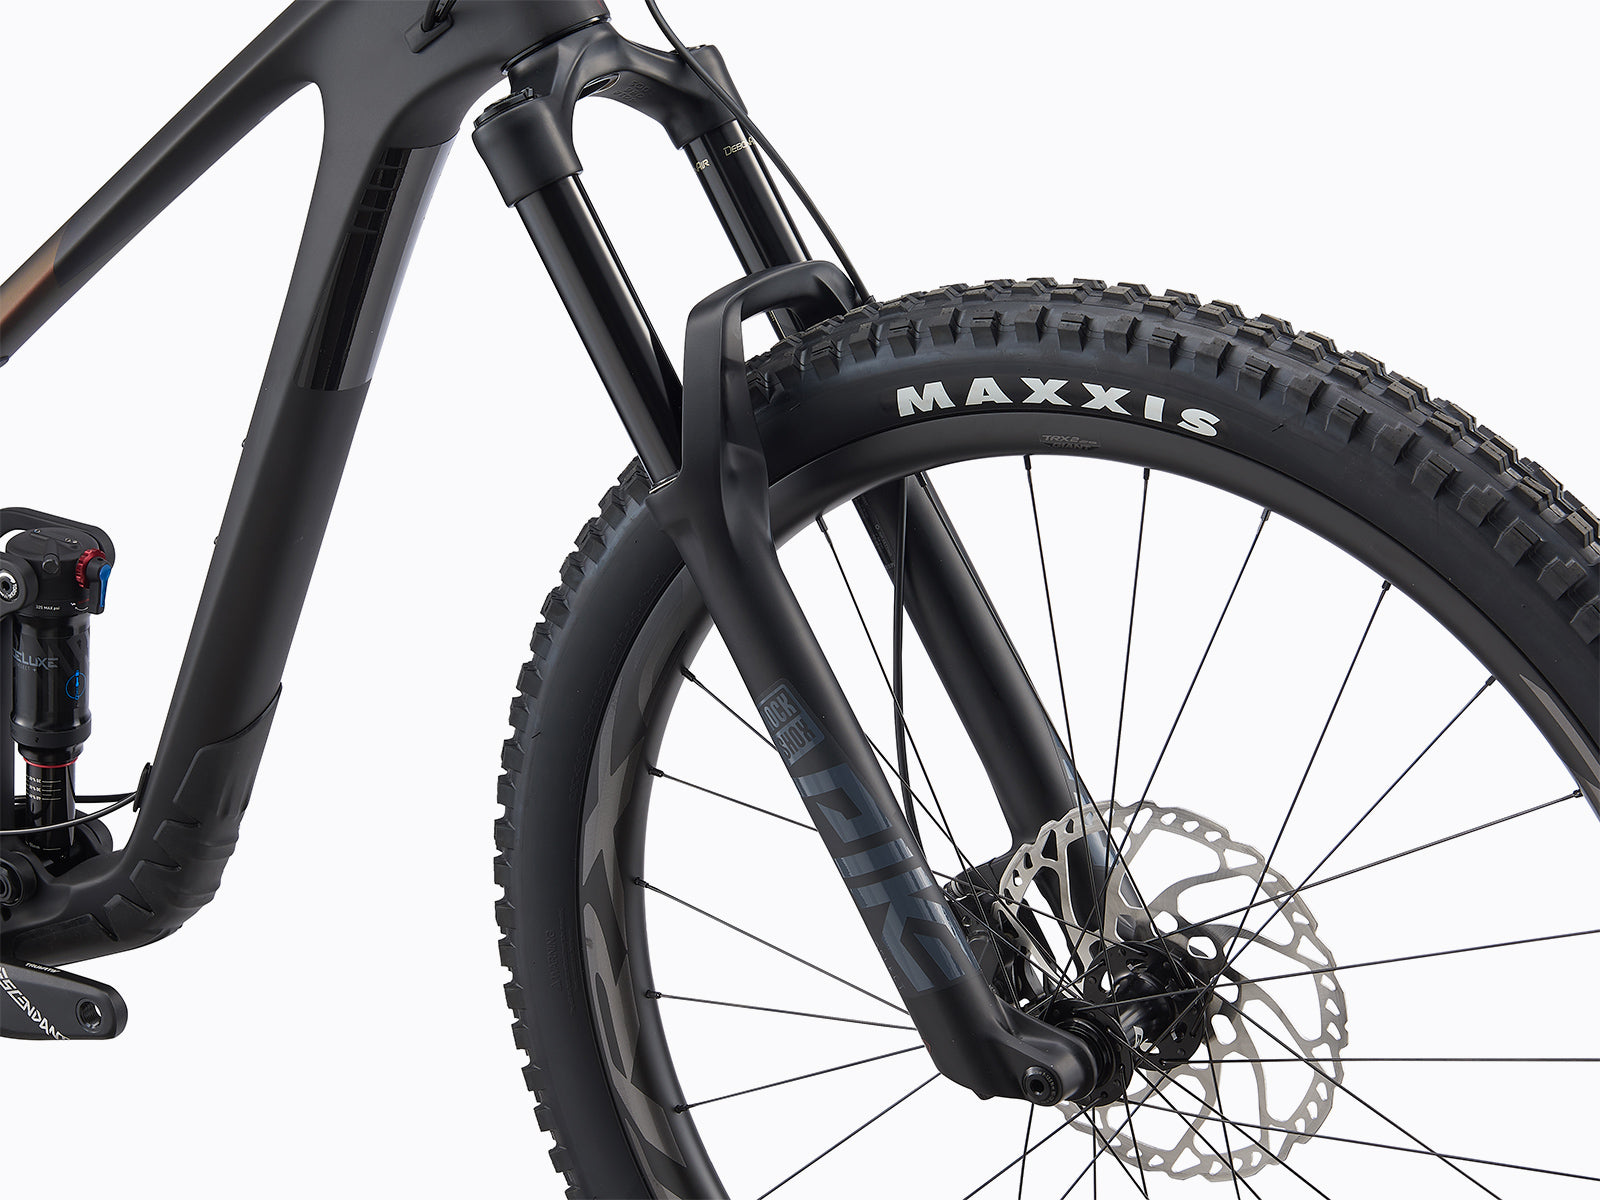 Image features a Giant Trance x advanced Pro 29 2, a giant mountain bike from their trail bike collection